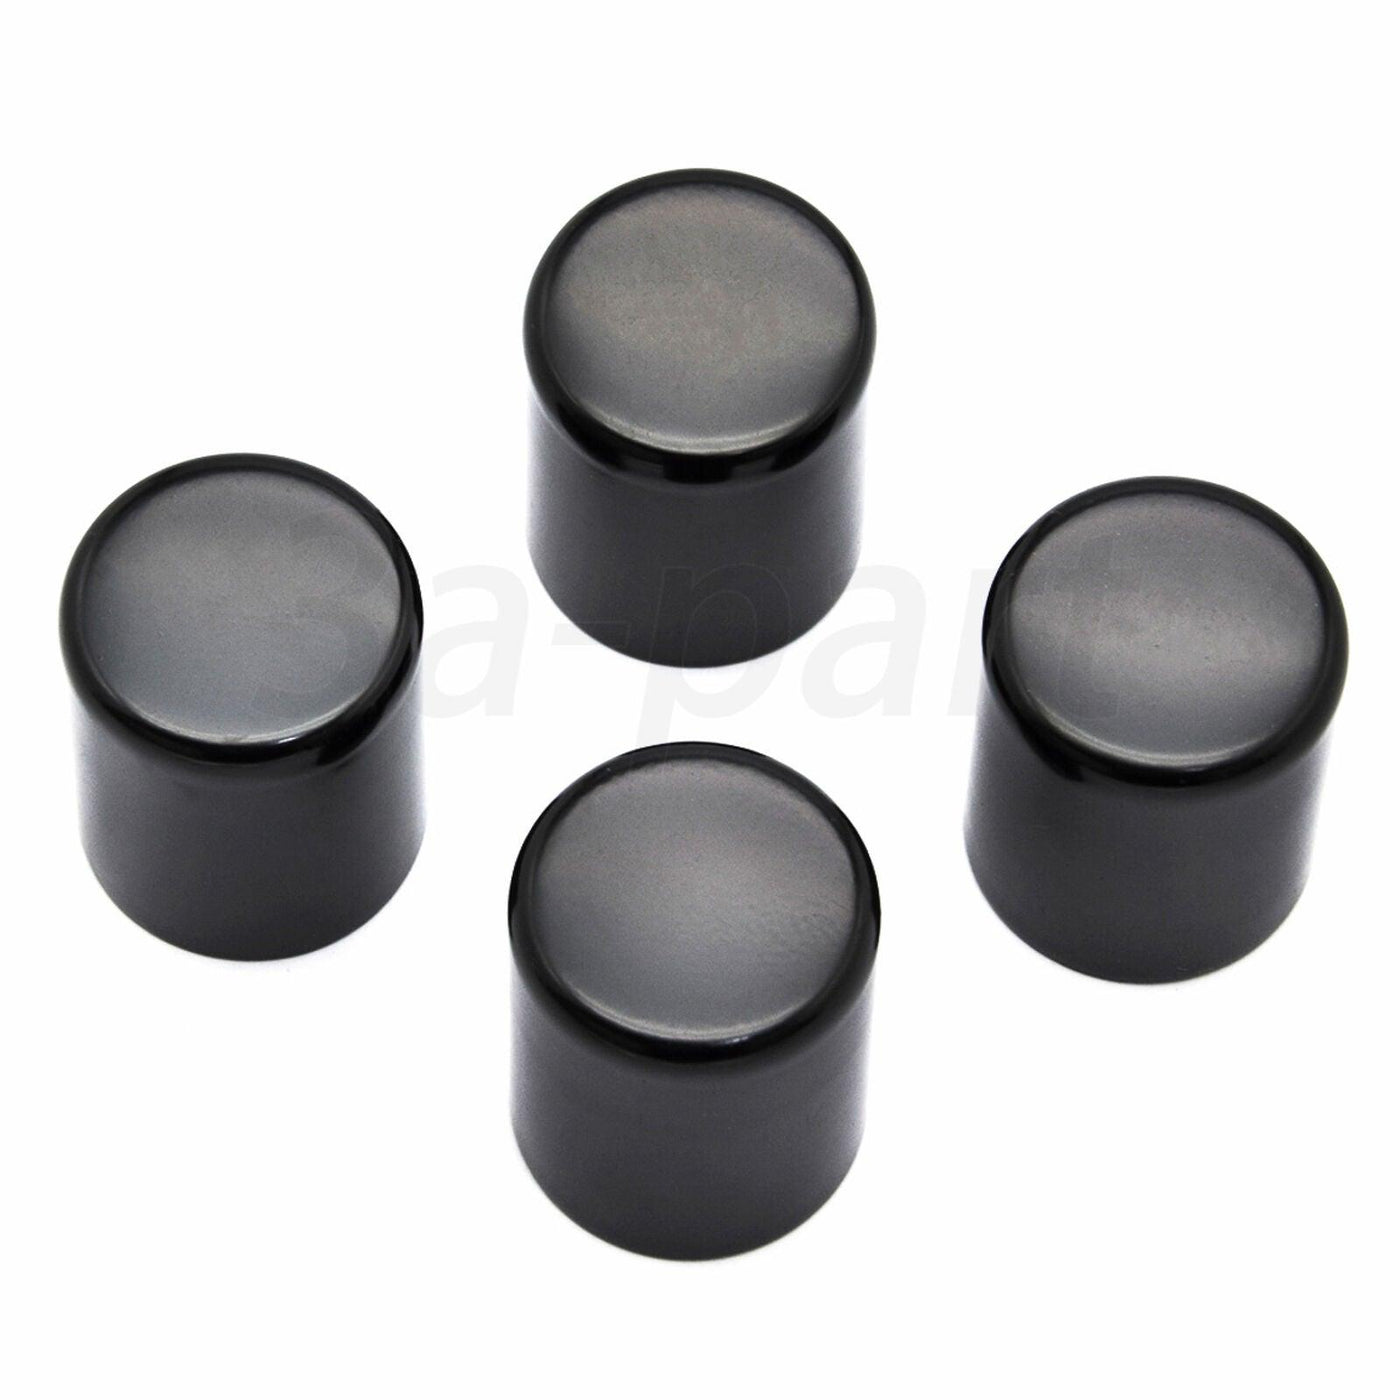 4PCS Black Docking Hardware Point Covers Fit for Harley Touring Softail 1996-21 - Moto Life Products